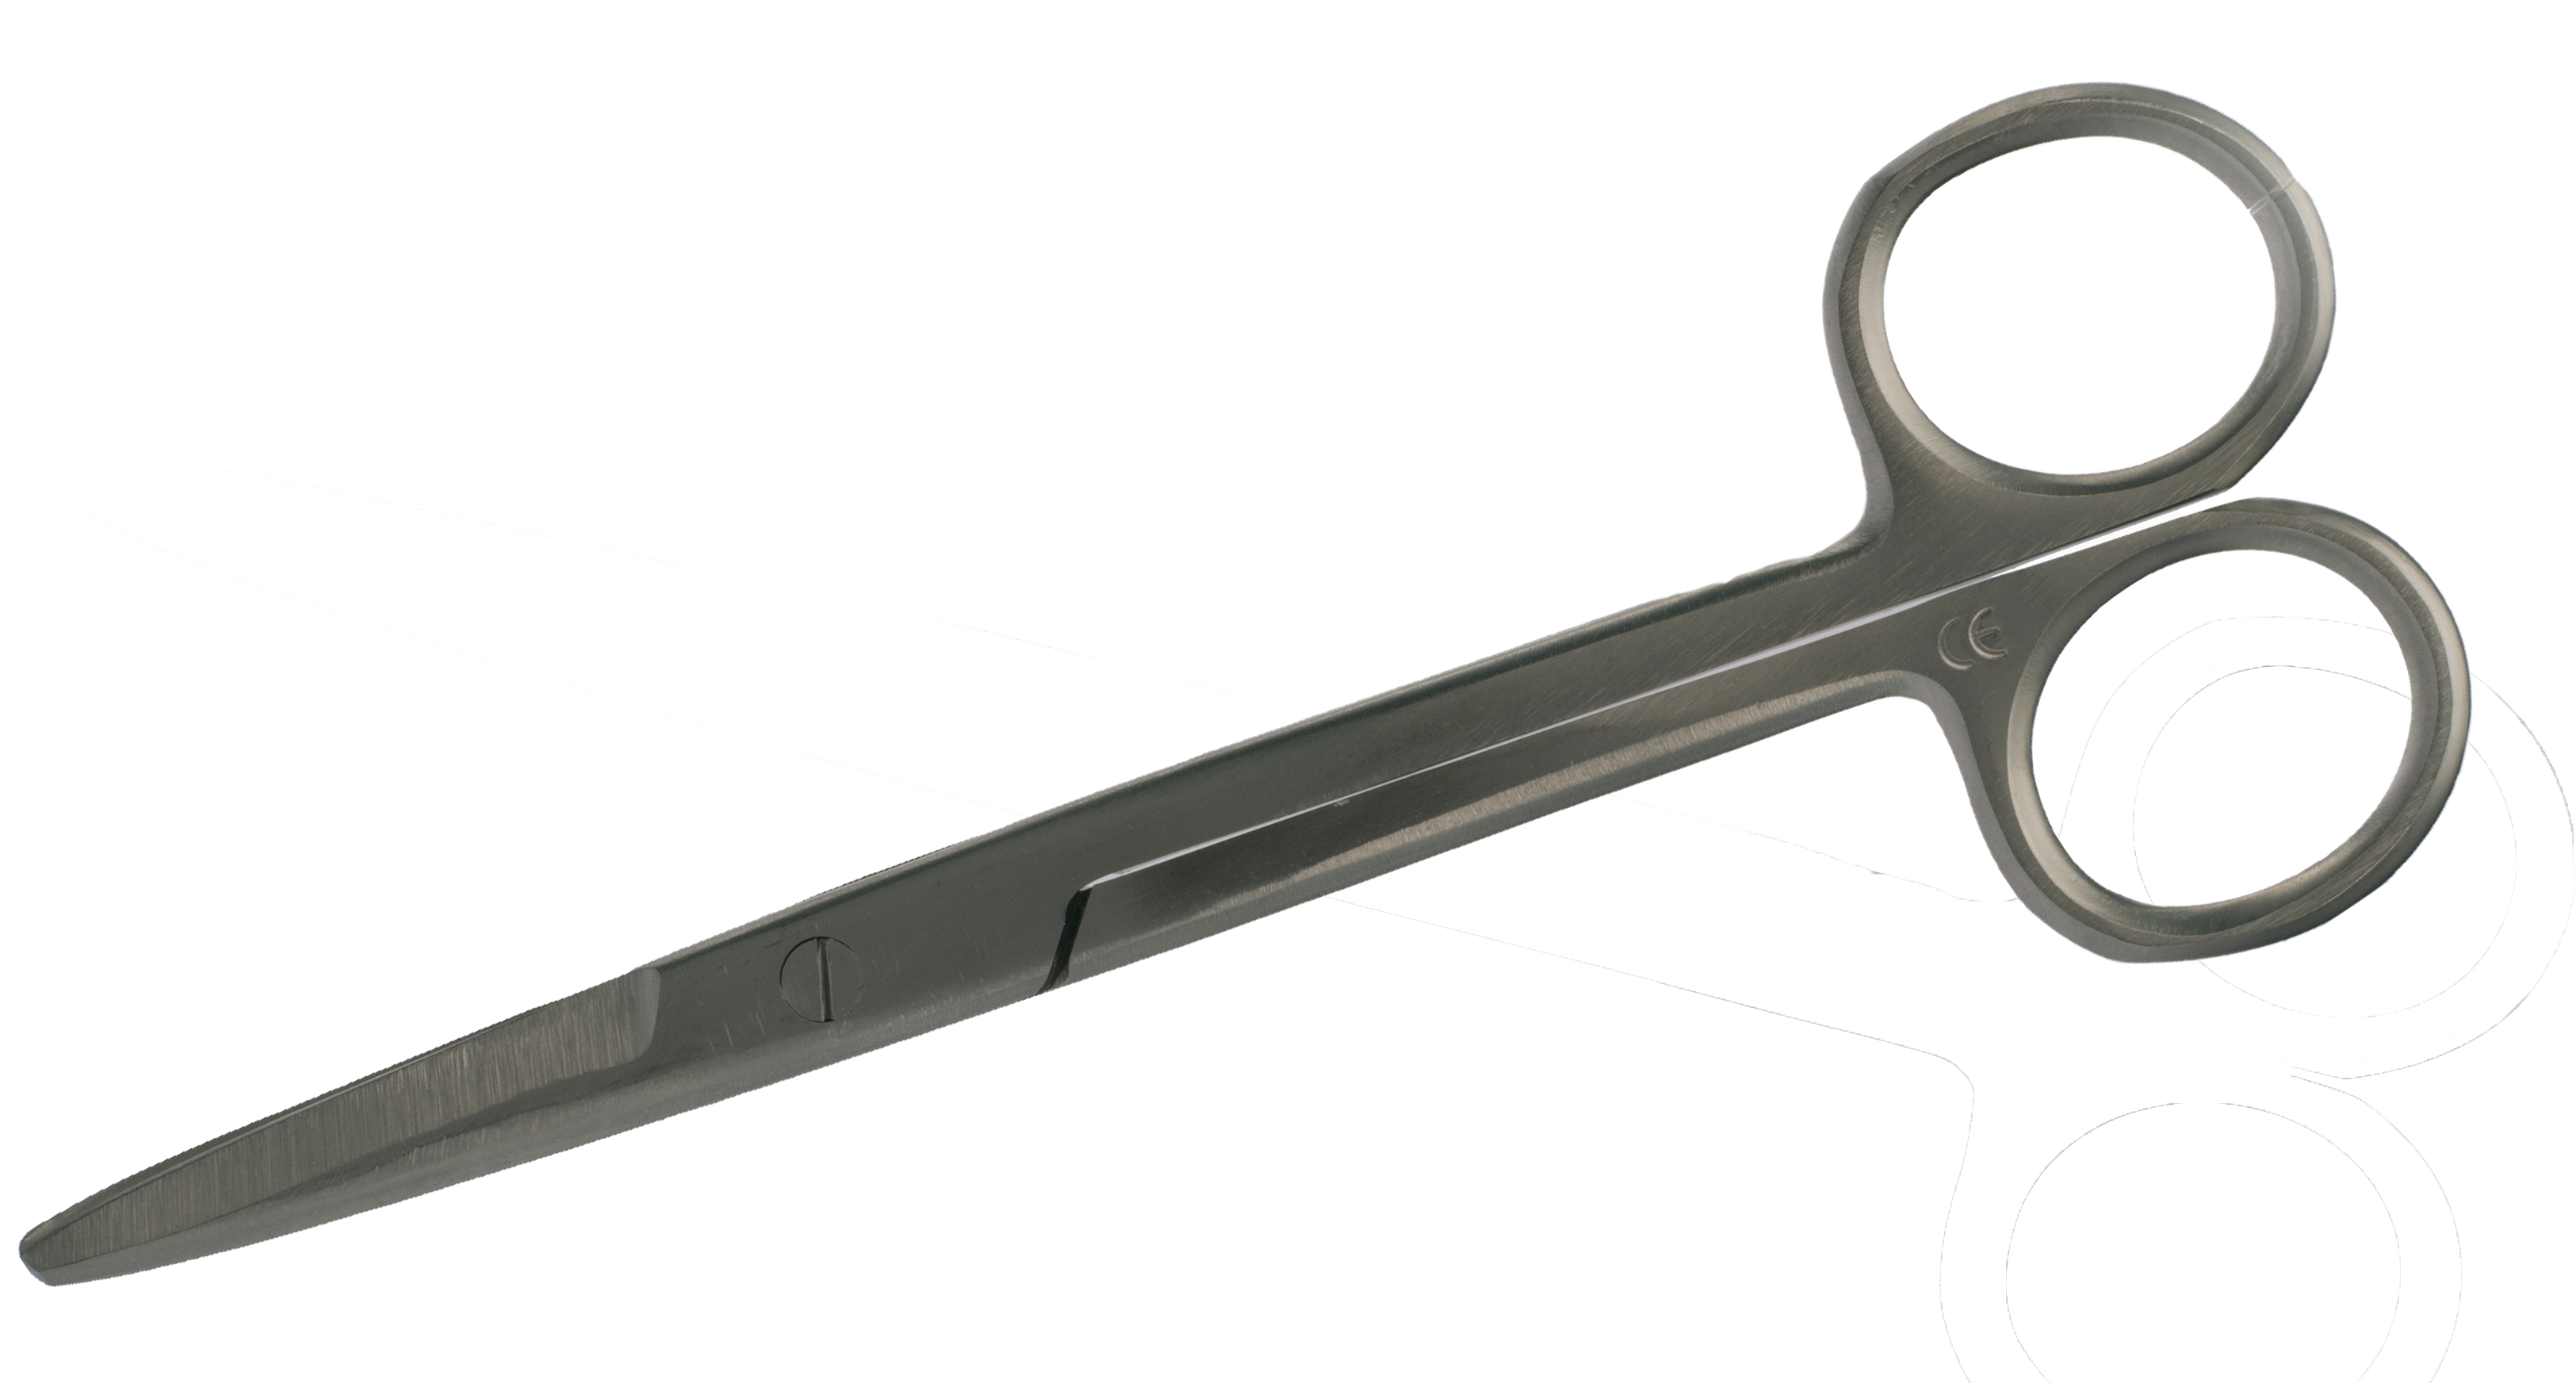 stoma scissors for cutting bags